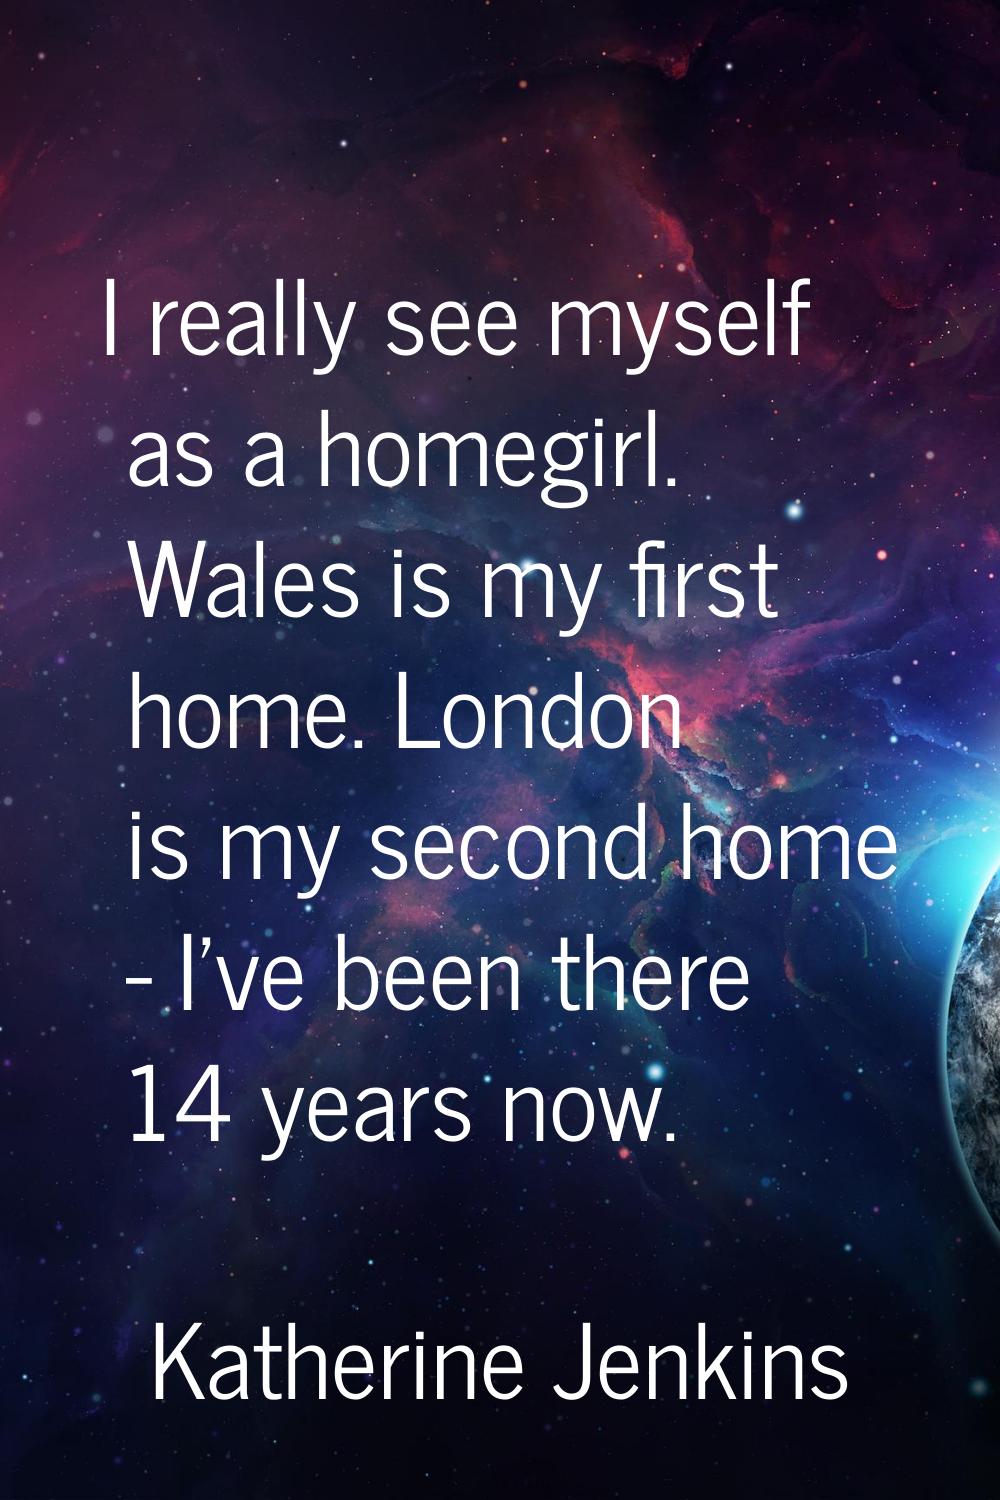 I really see myself as a homegirl. Wales is my first home. London is my second home - I've been the